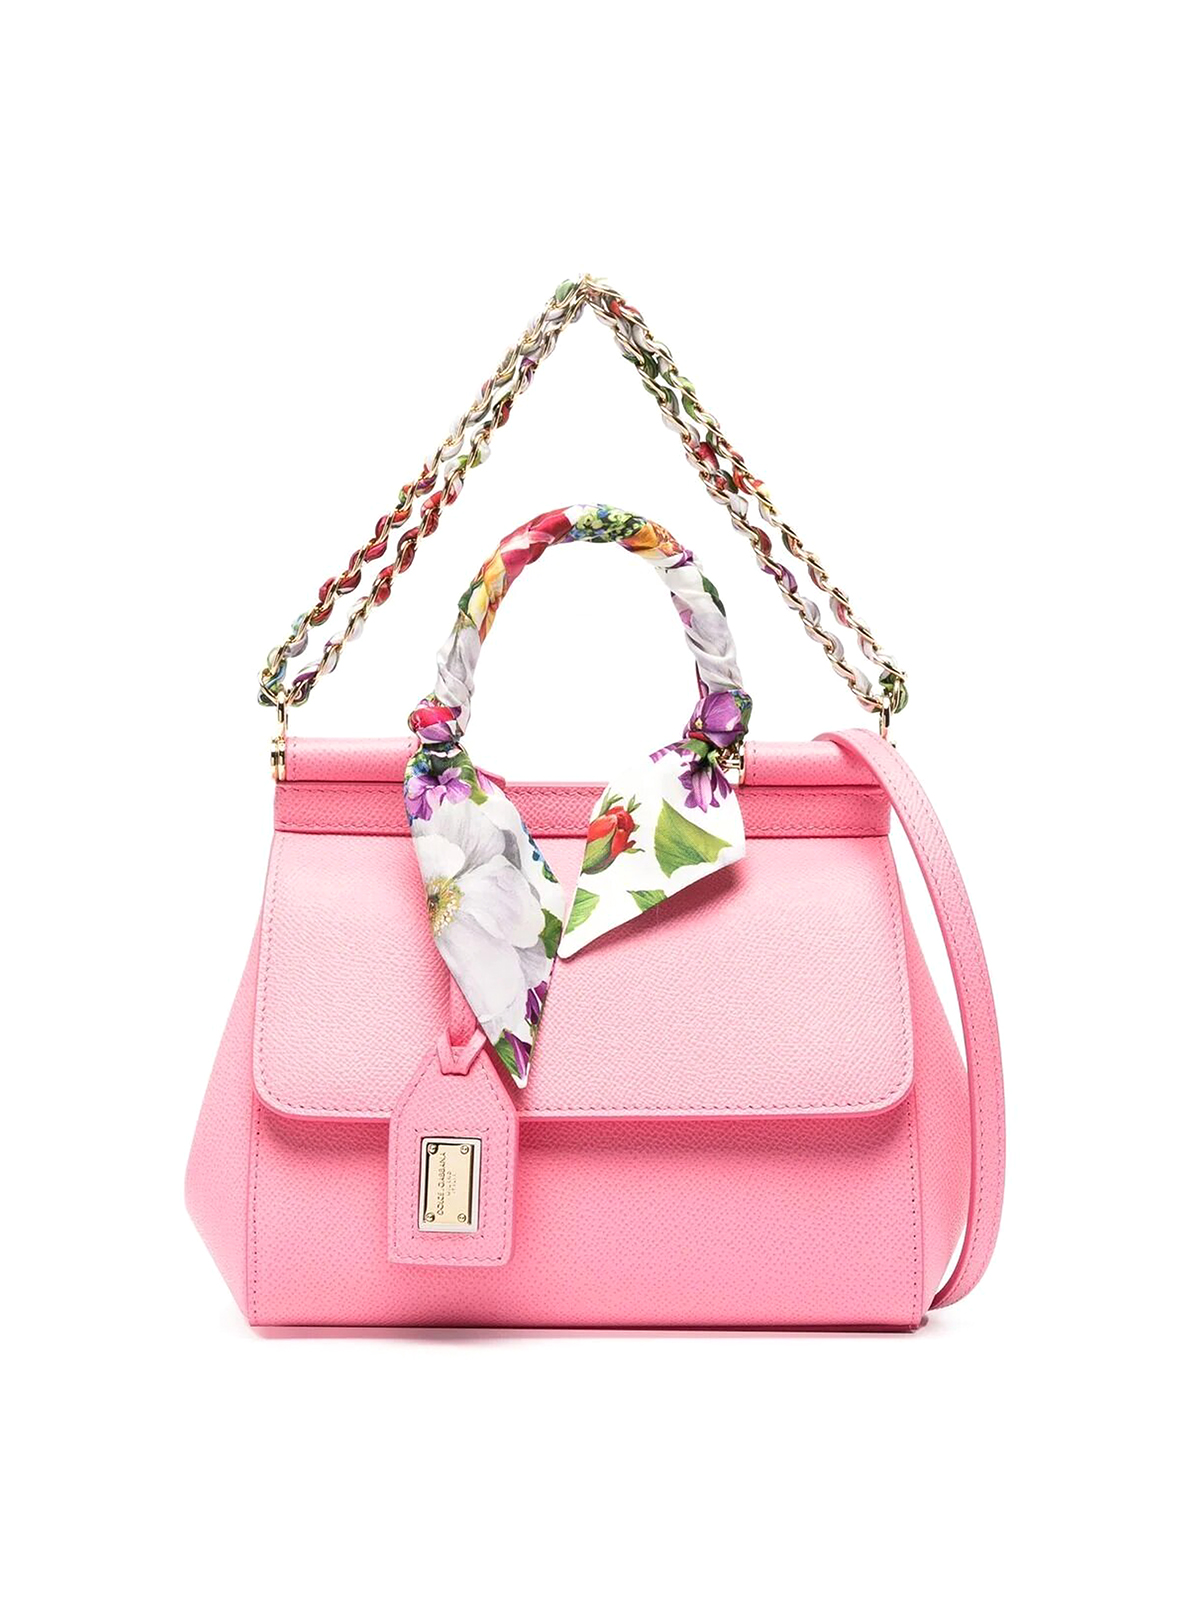 Shop Dolce & Gabbana SICILY Small dauphine leather sicily bag by